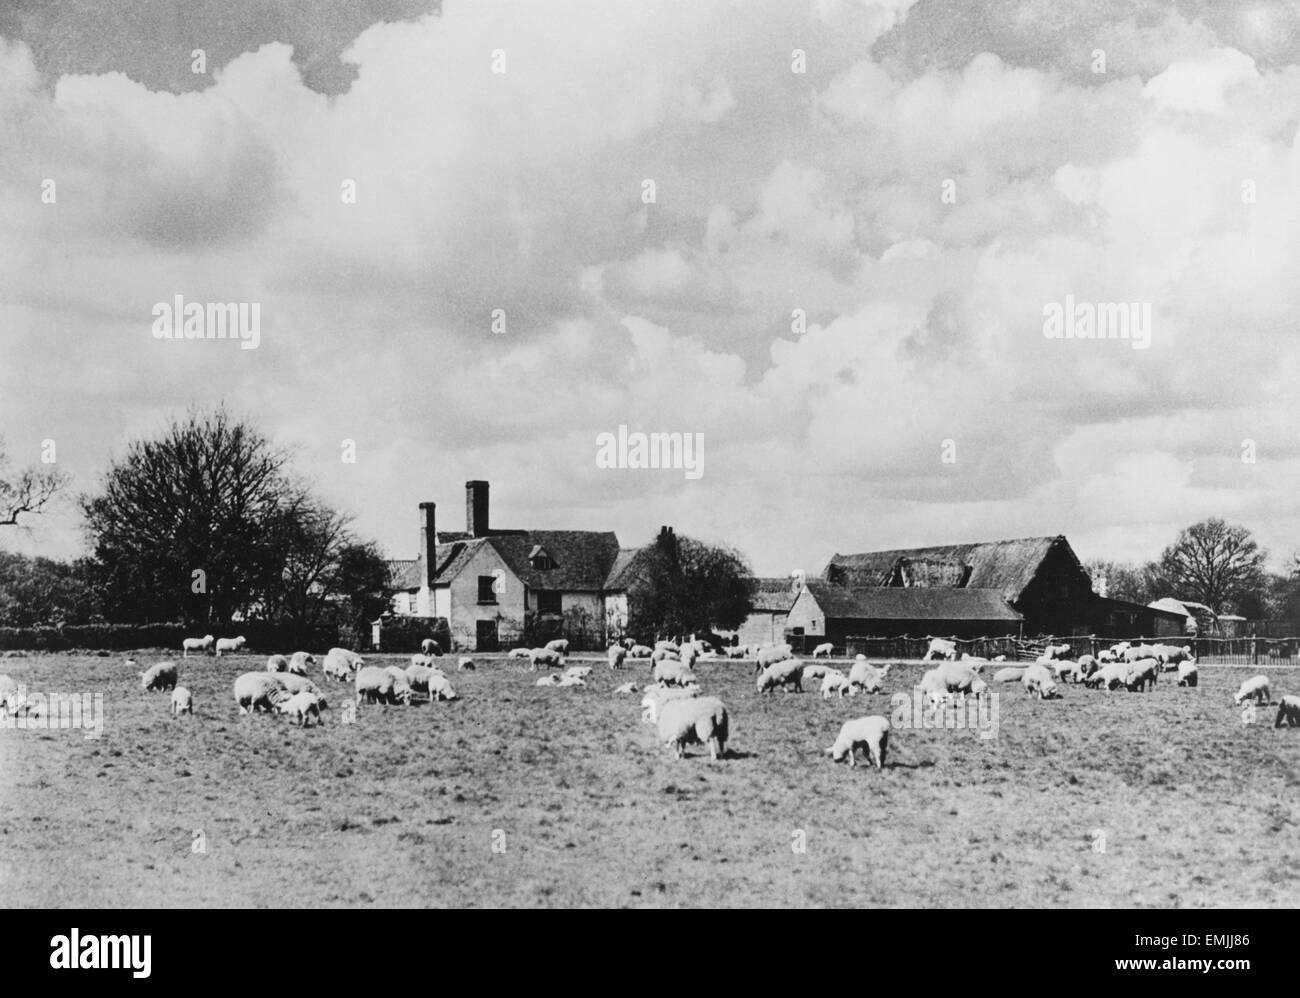 Sheep and Farm, Stoke-by-Nayland, Suffolk, England, 1935 Stock Photo